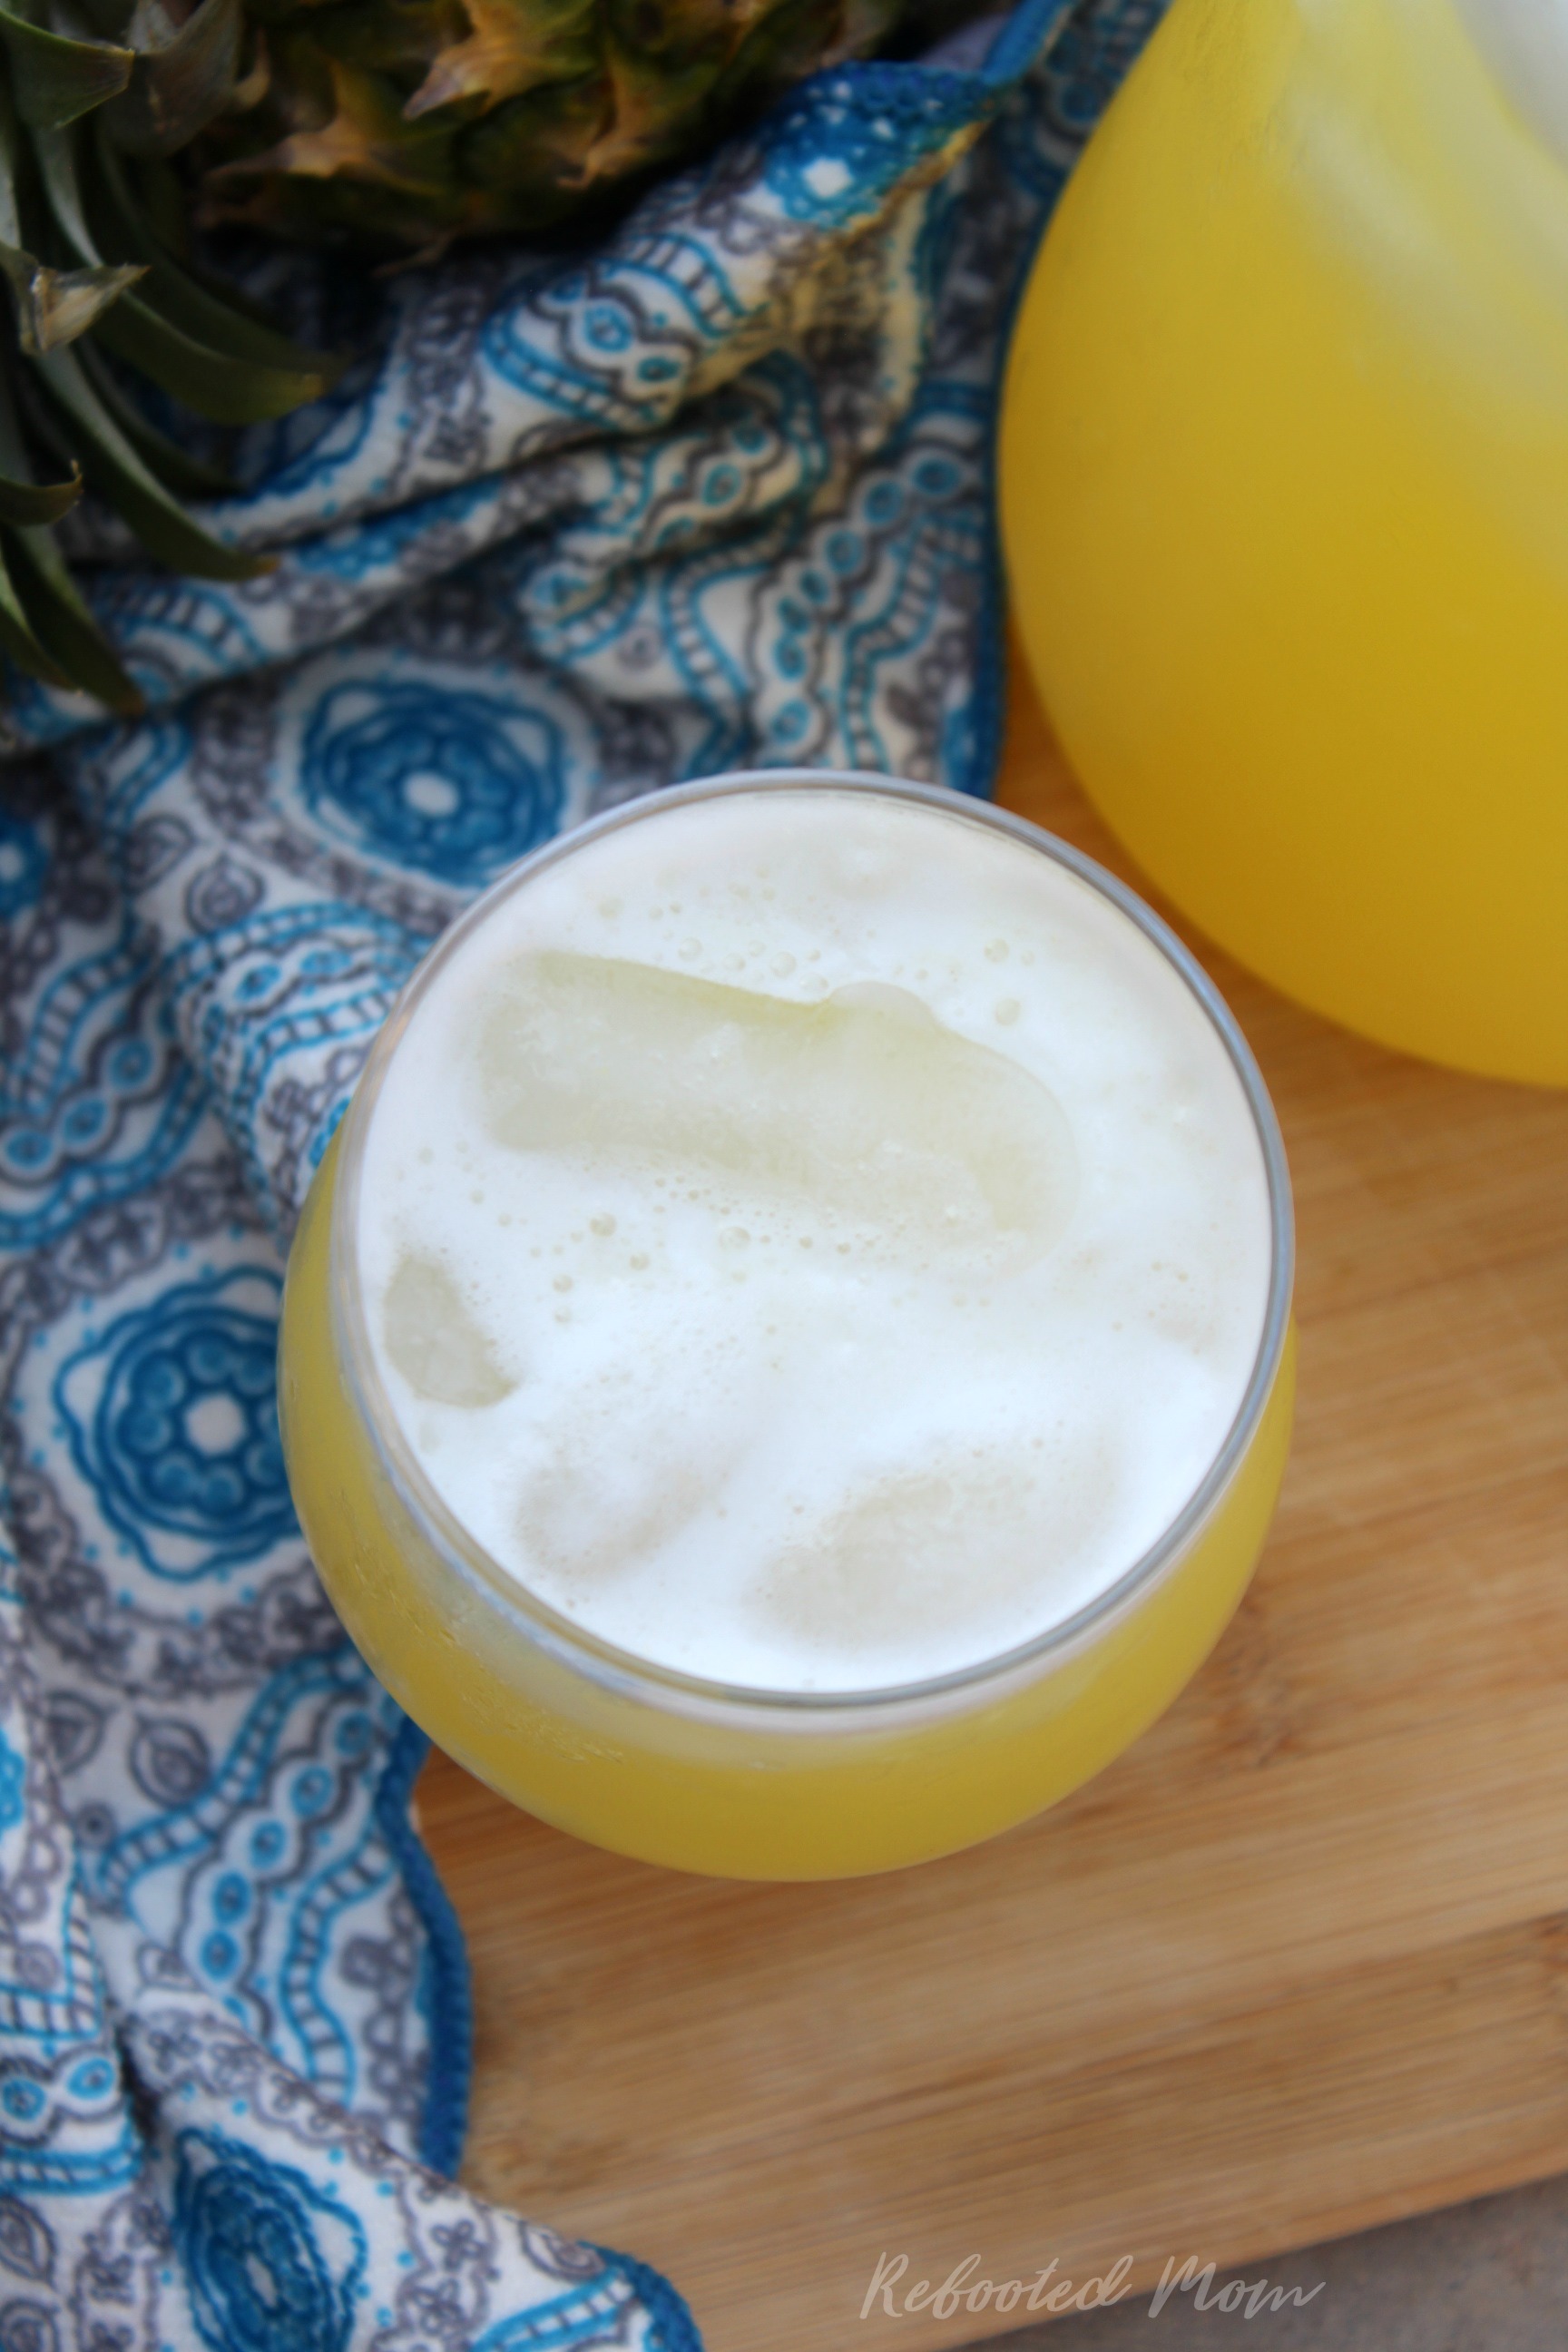 Summer is the best time of the year to enjoy Agua de Piña, or Pineapple Agua Fresca. It's deliciously sweet and easy to make at home!